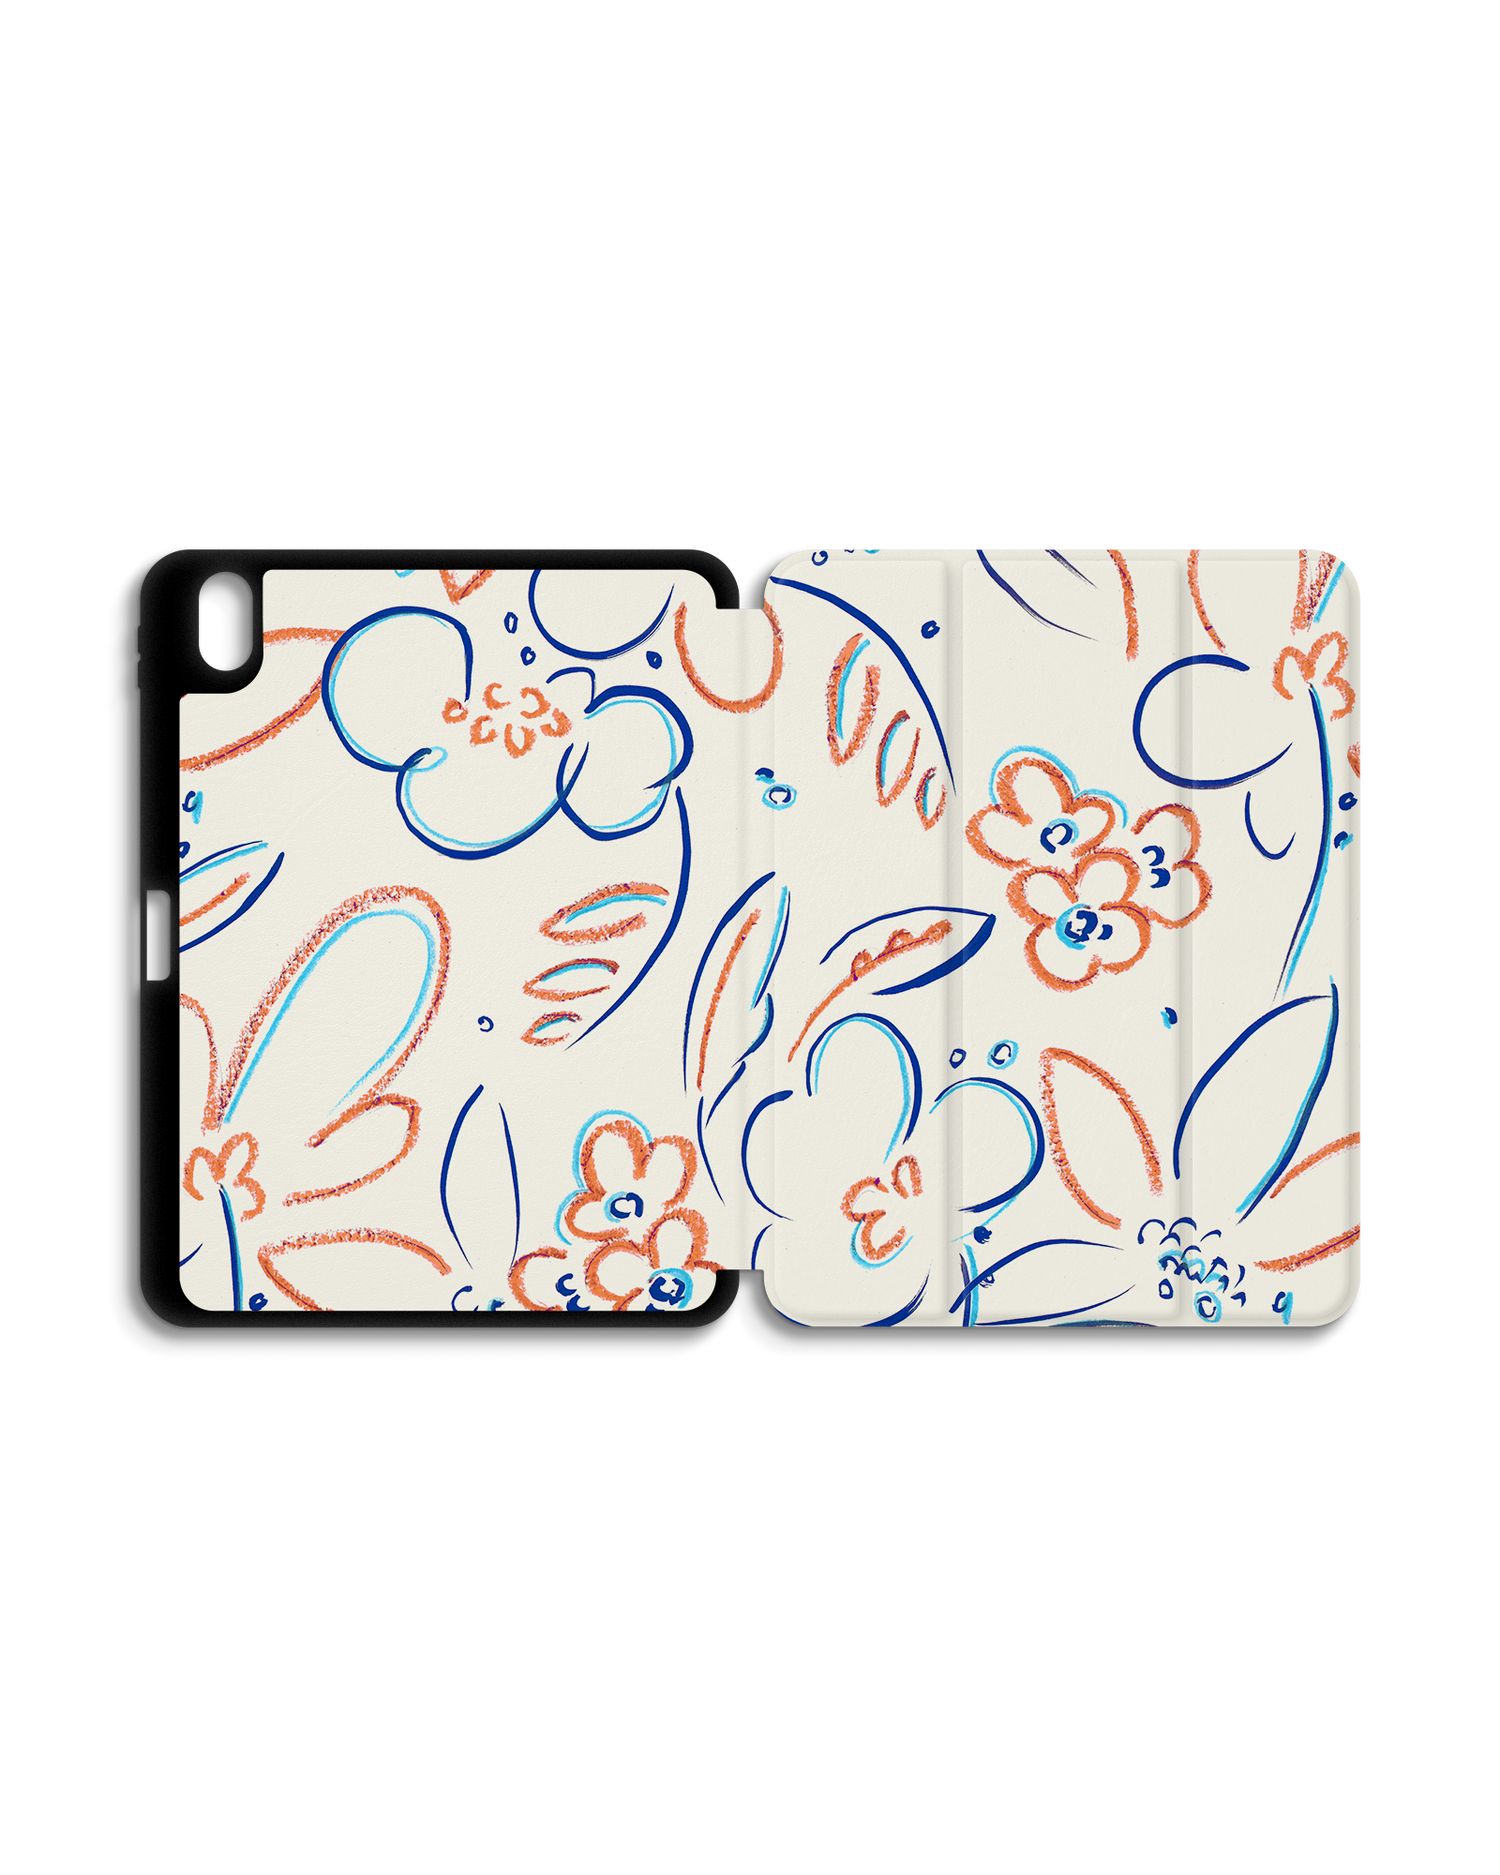 Bloom Doodles iPad Case with Pencil Holder for Apple iPad (10th Generation): Opened exterior view